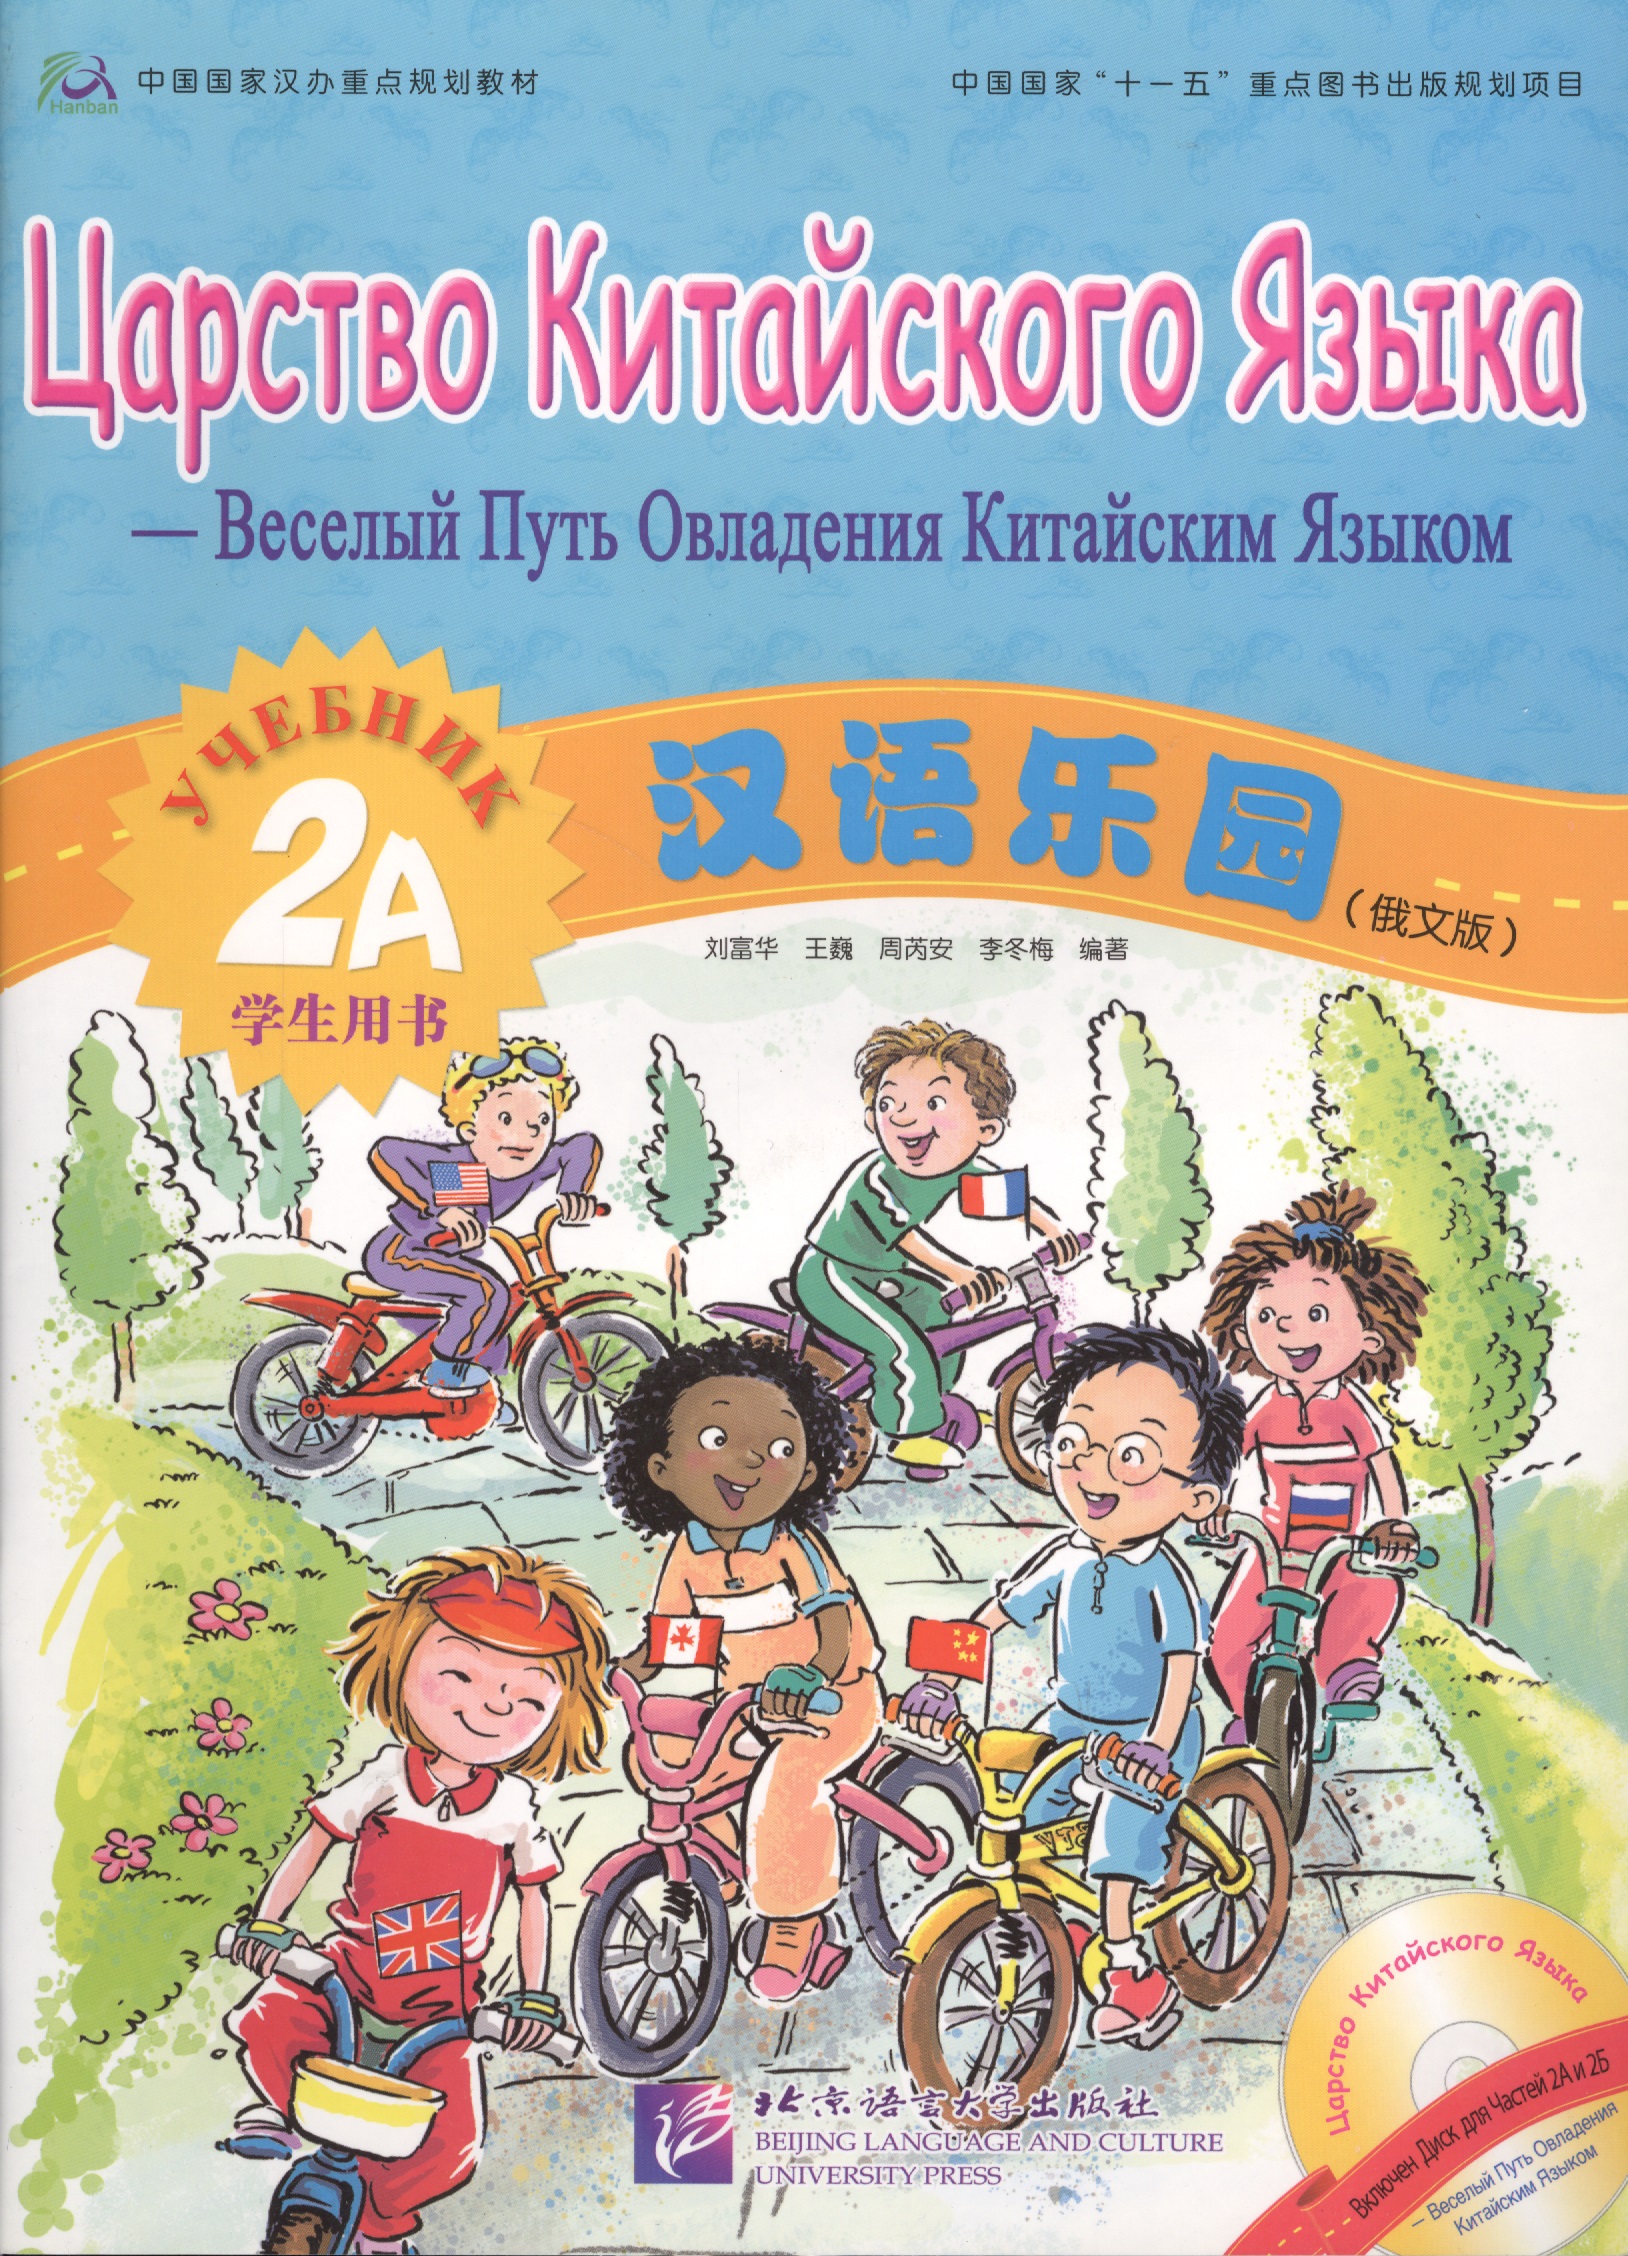 Fuhua L. Chinese Paradise (Russian edition) 2A / Царство китайского языка (русское издание) 2A - Students book with CD fuhua l chinese paradise russian edition 1b царство китайского языка русское издание 1b workbook